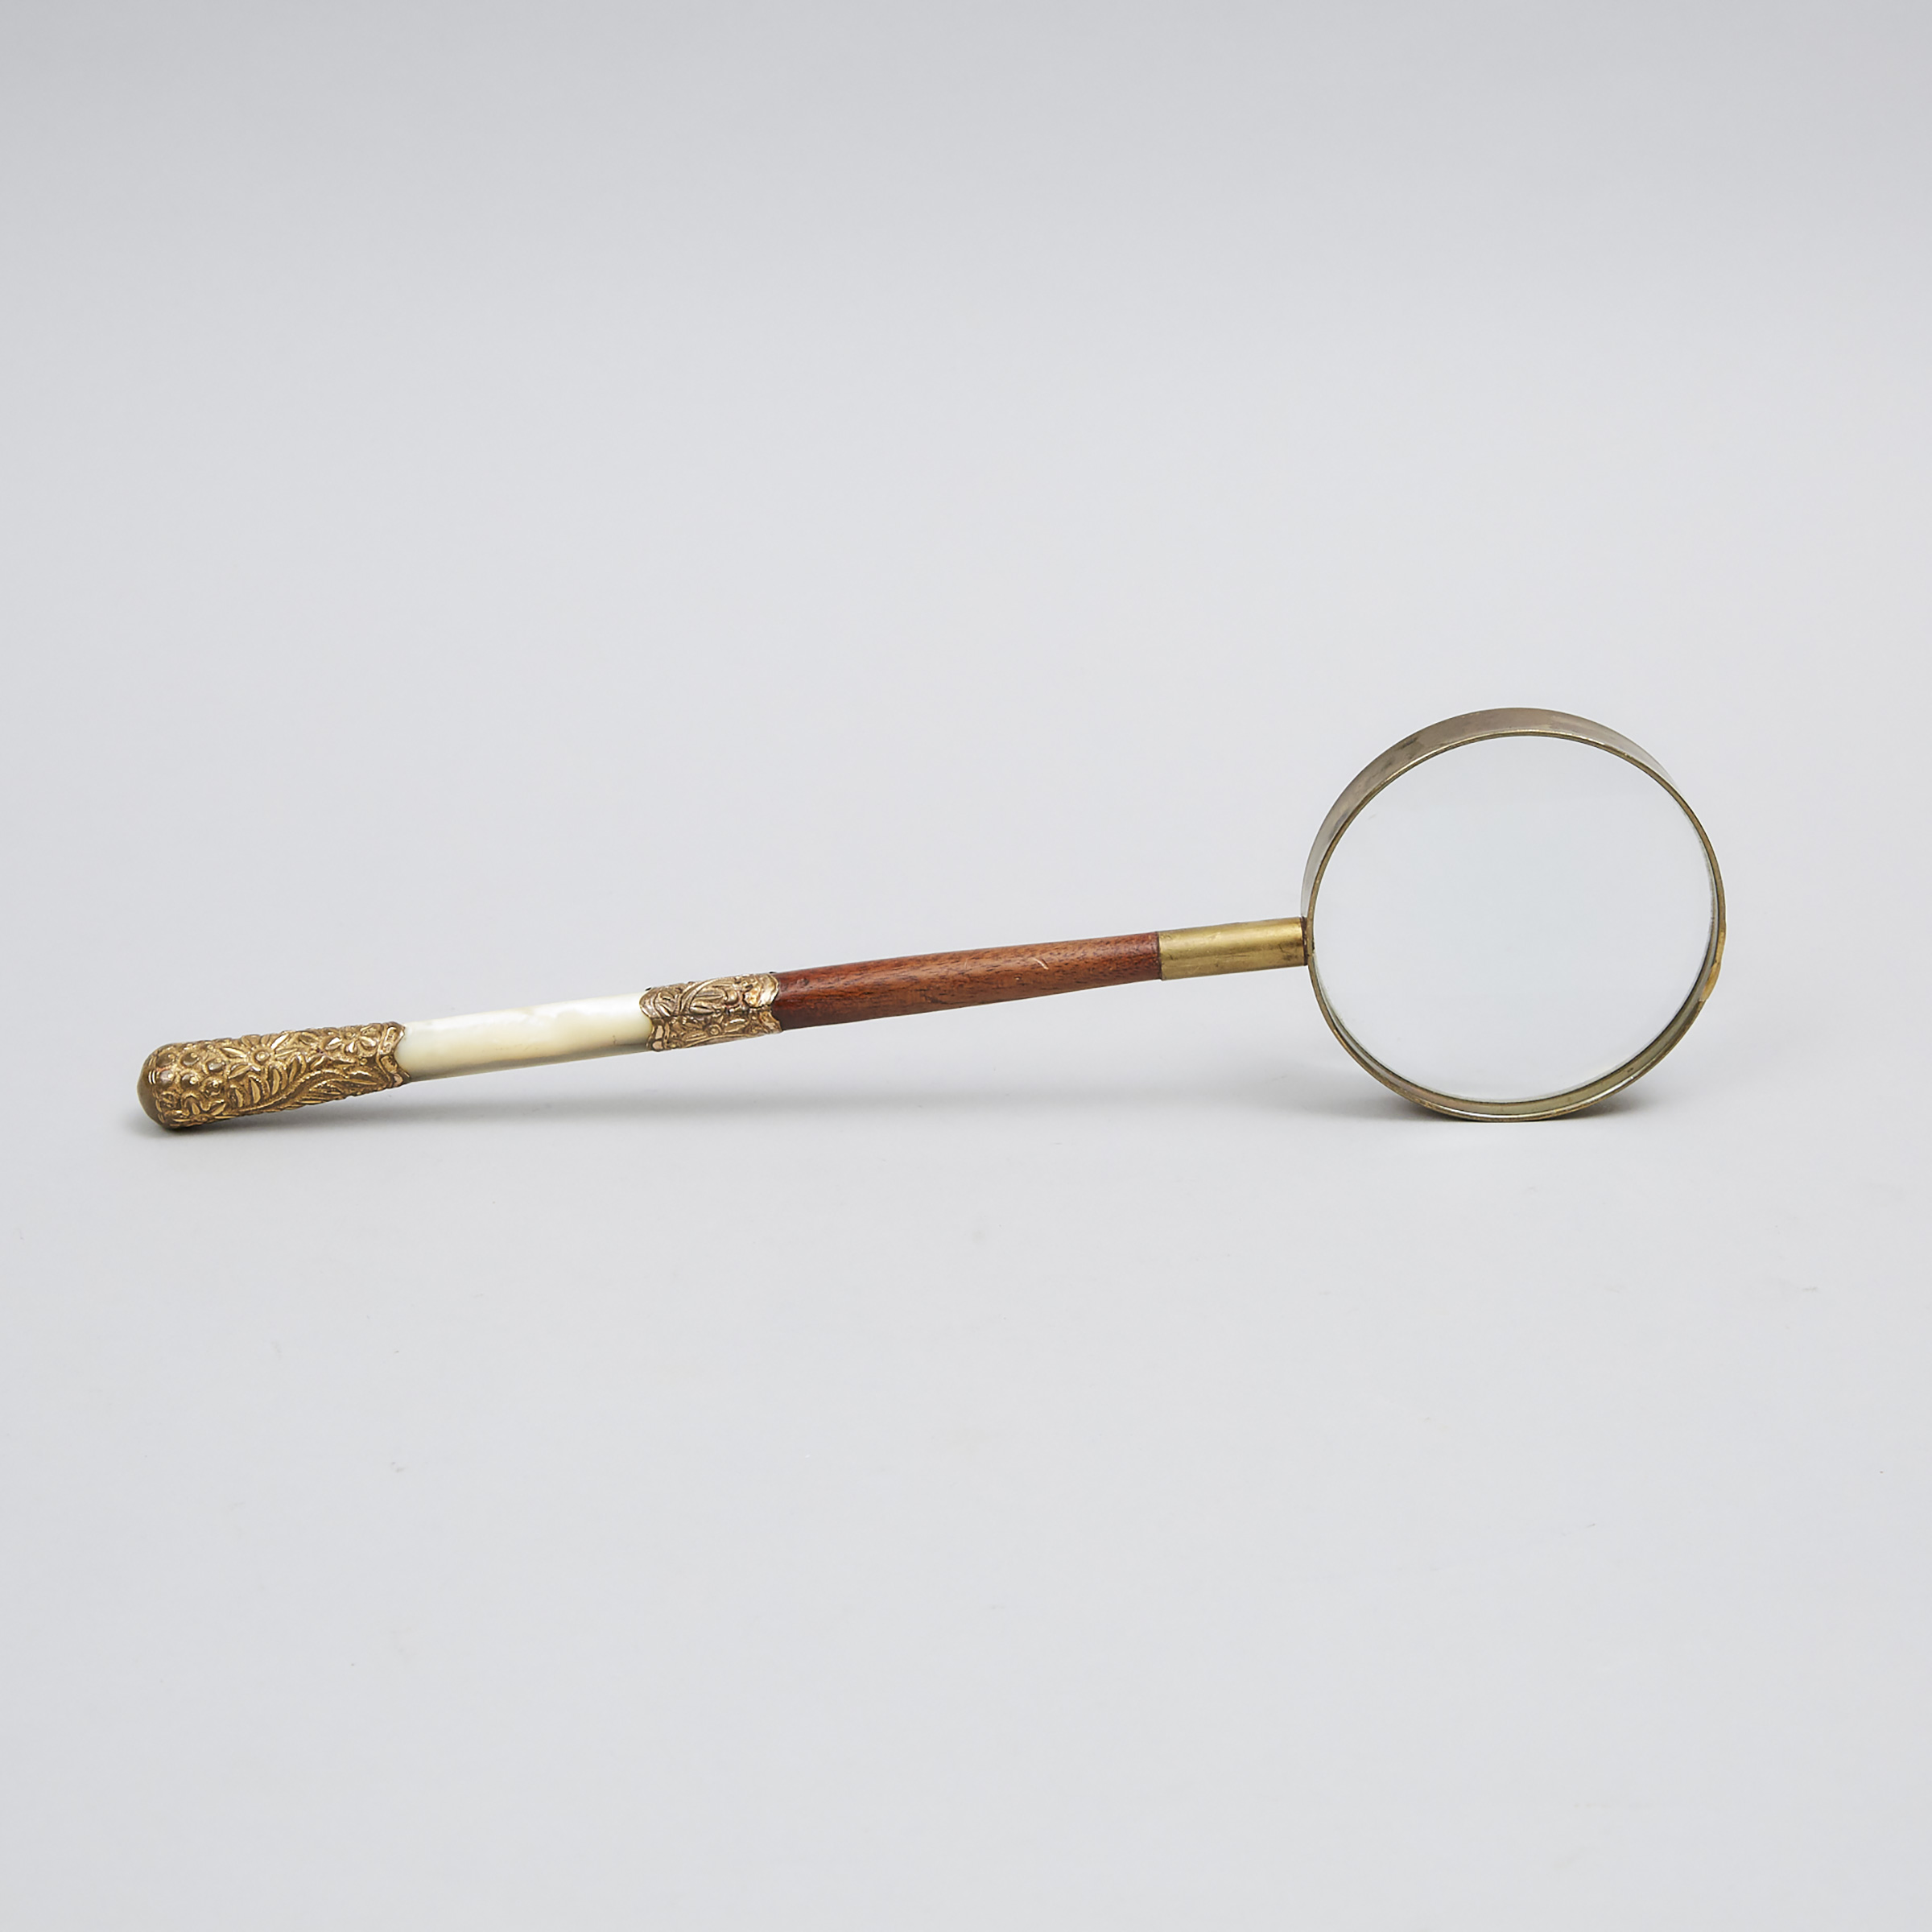 French Gilt Metal and Abalone Mounted Parasol Handled Magnifying Glass, 19th century and later